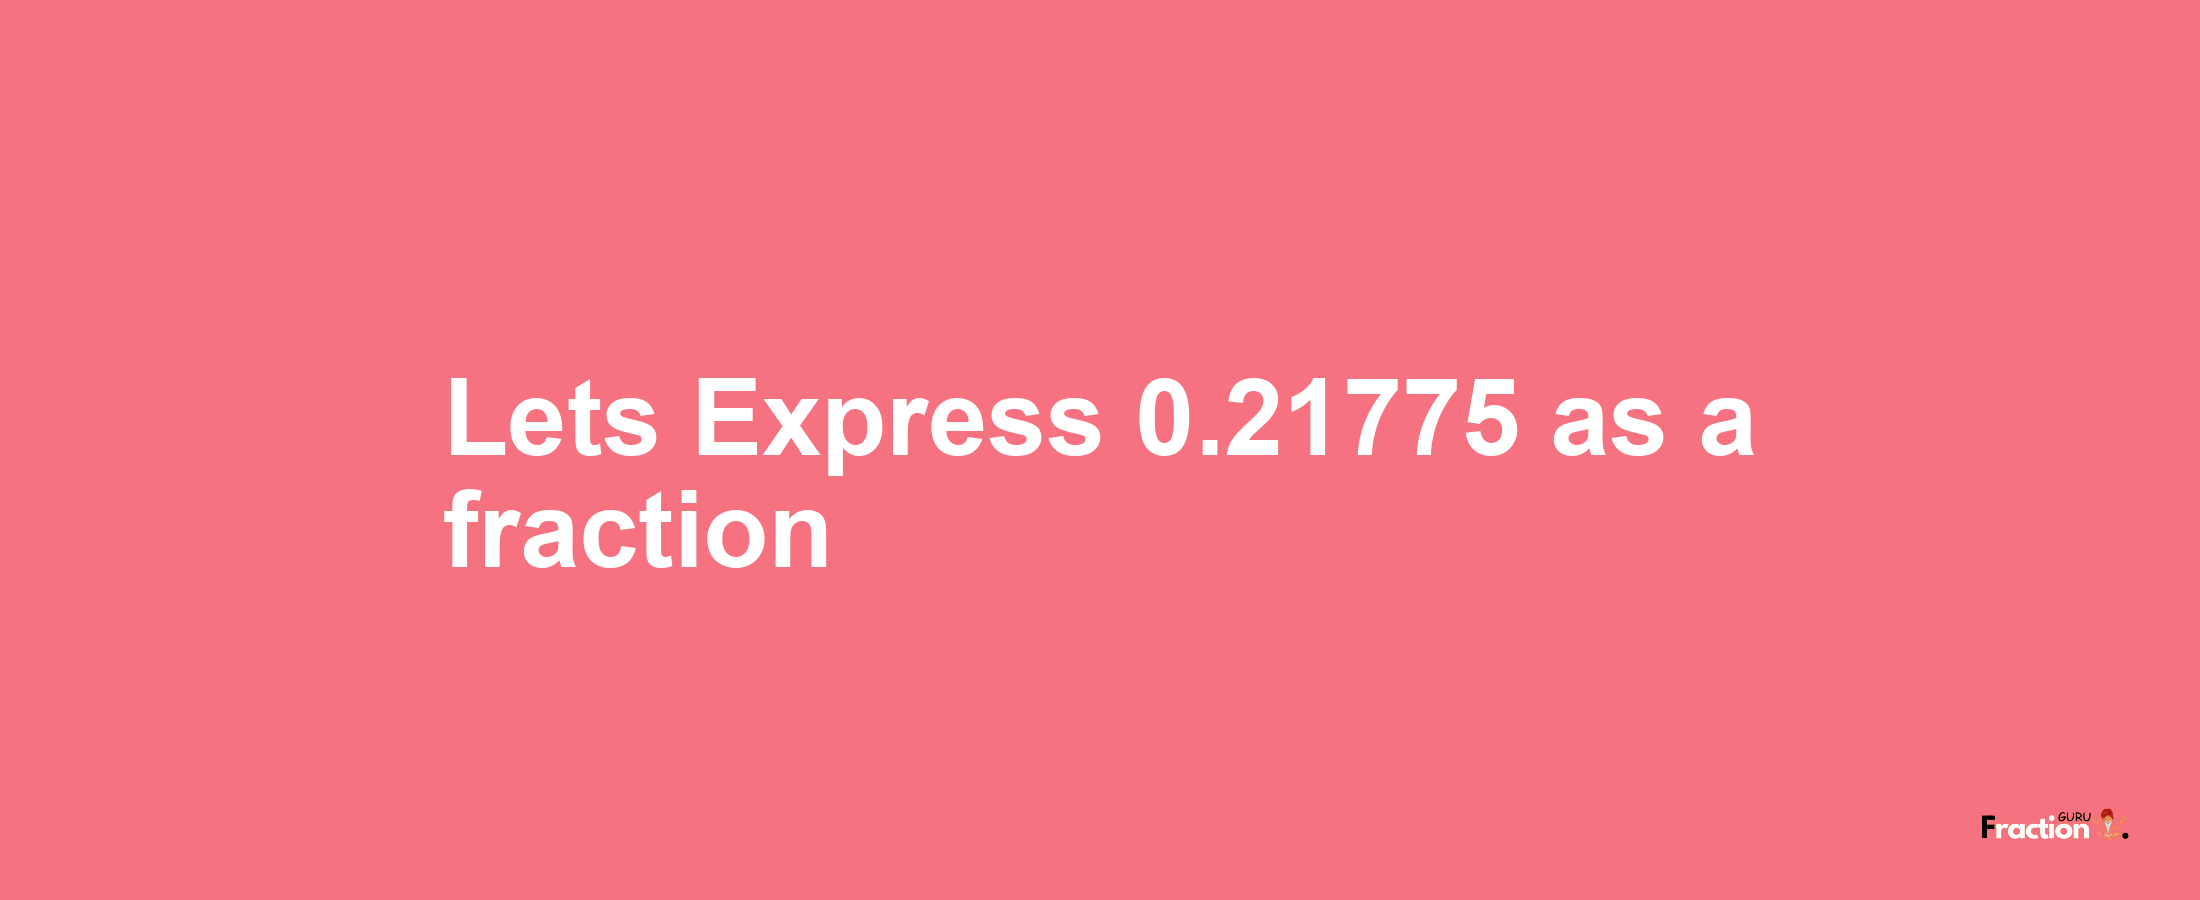 Lets Express 0.21775 as afraction